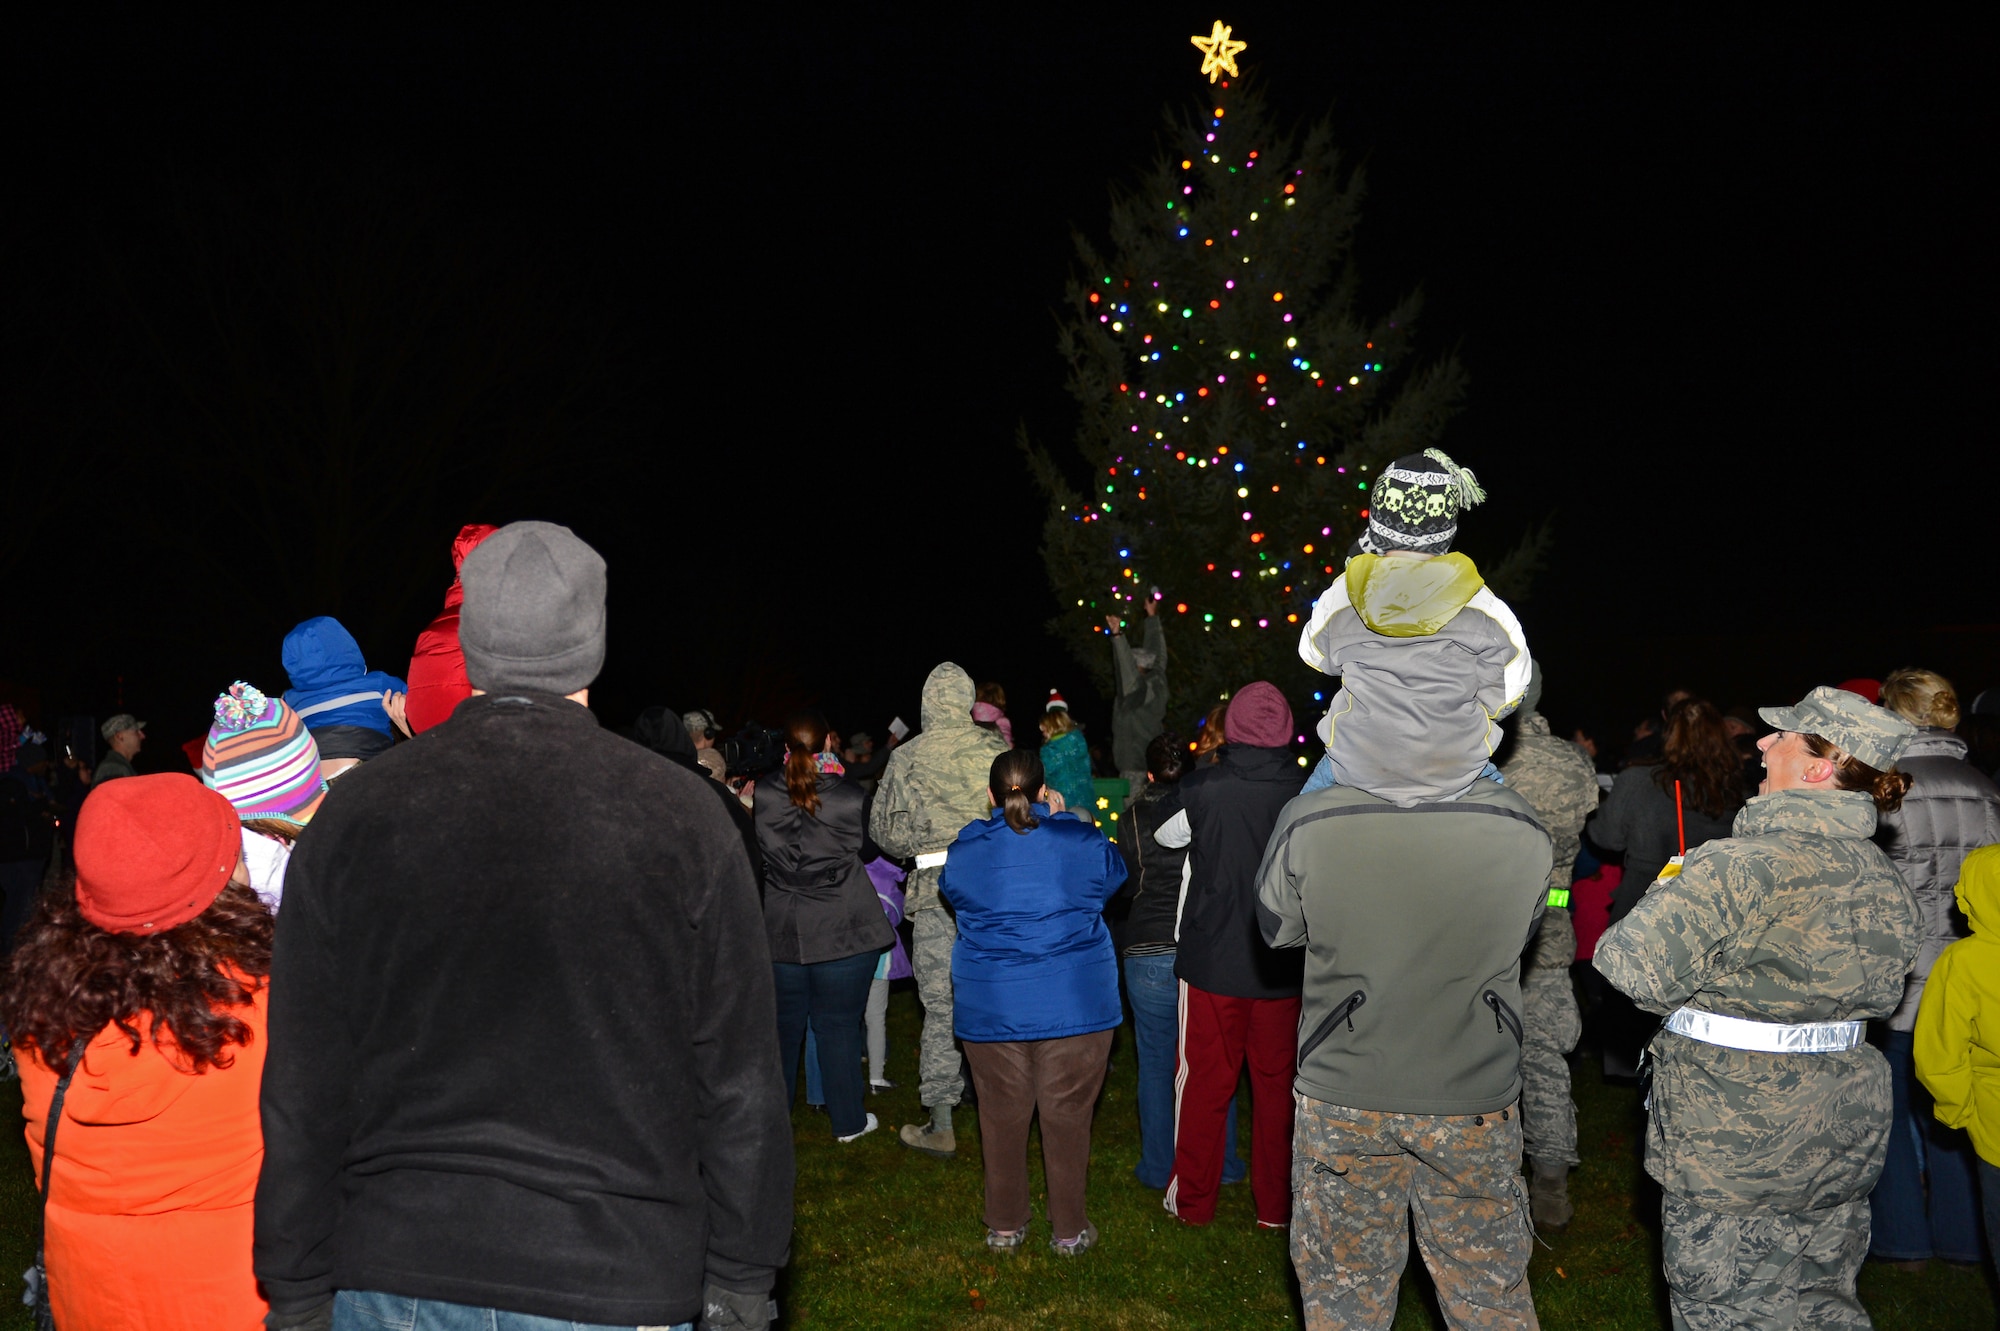 SPANGDAHLEM AIR BASE, Germany – Base community members celebrate during the Holiday Tree Lighting ceremony Nov. 29, 2012. The annual ceremony allows the community to get into the holiday spirit by enjoying snacks, refreshments and live holiday music. The 52nd Civil Engineer Squadron set up and lit the tree to usher in the holiday season. (U.S. Air Force photo by Airman 1st Class Dillon Davis/Released)